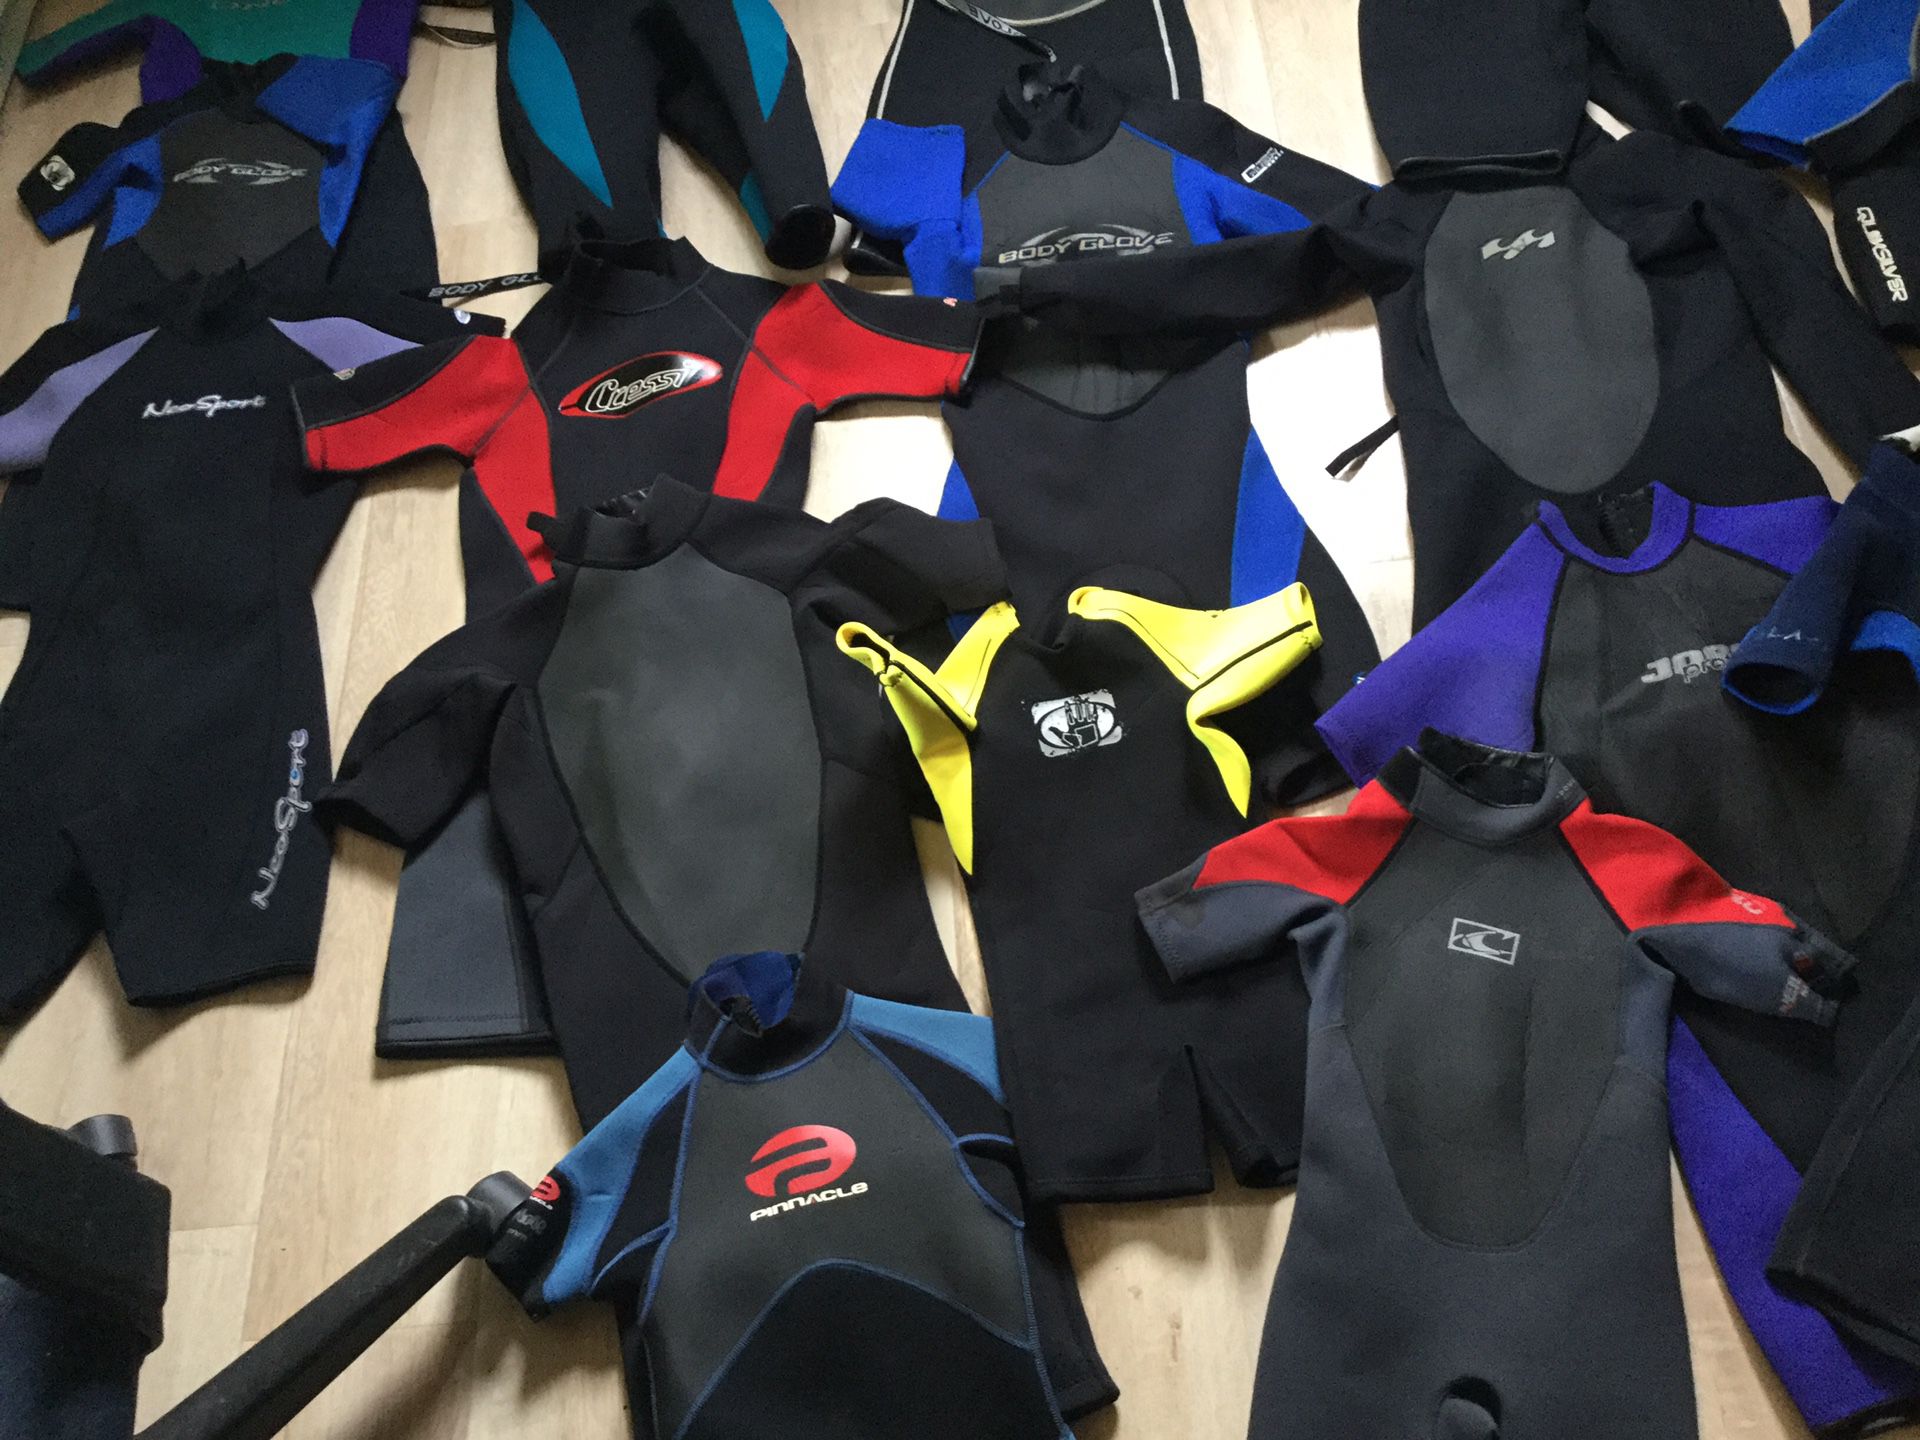 Wetsuits shorty spring suits youth, kids,adults ,boogie board bodyboard surfing swimming